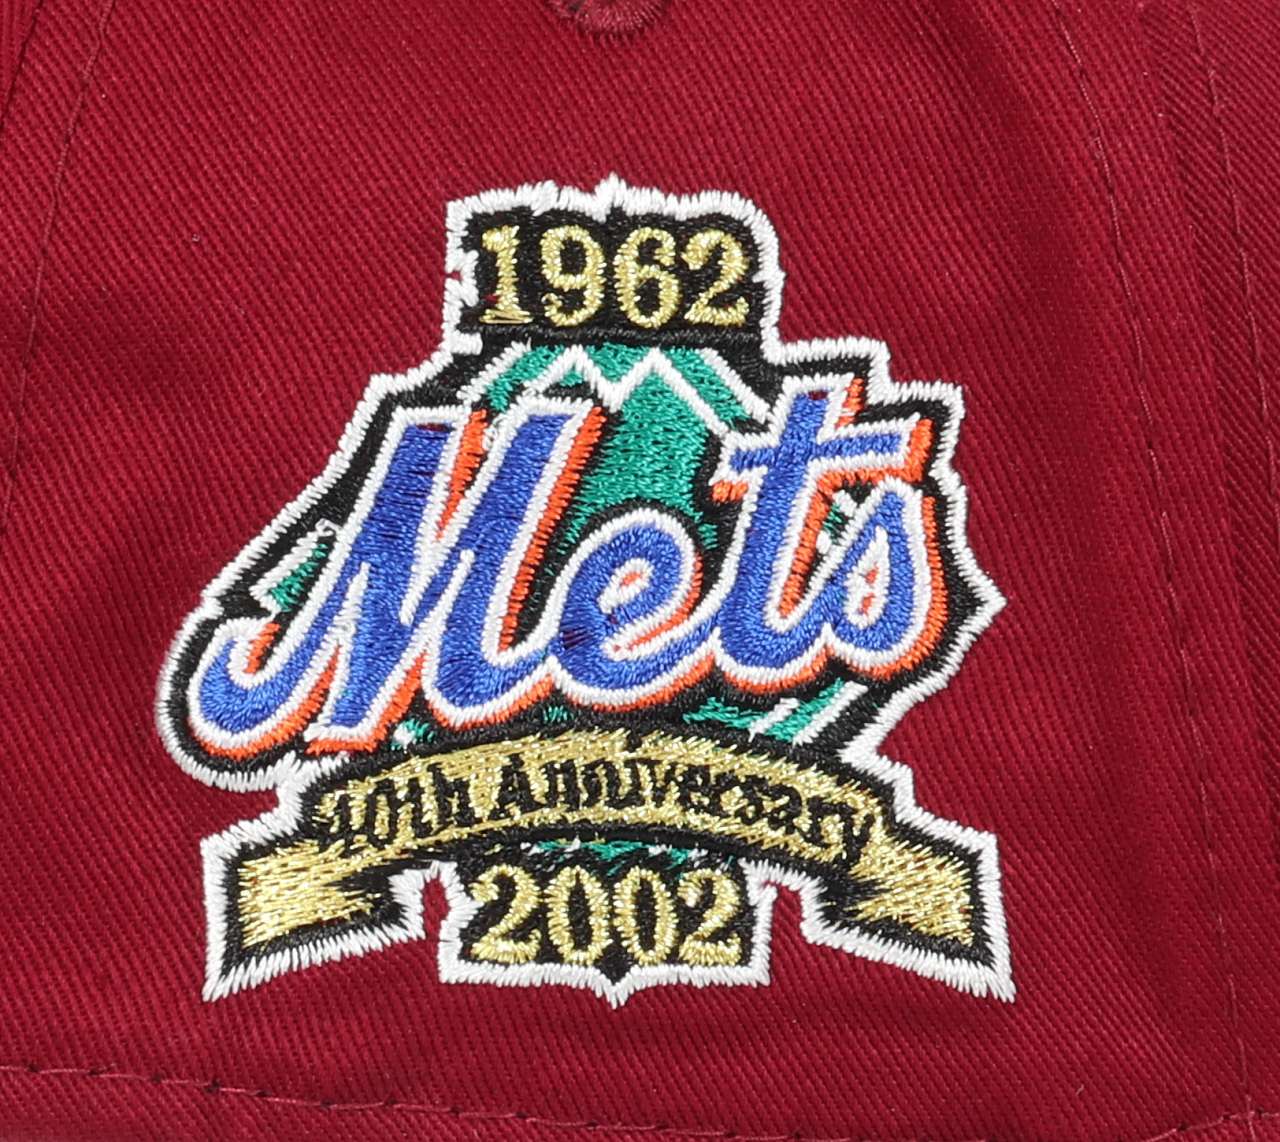 New York Mets MLB 40th Anniversary 1962-2002 Sidepatch Cardinal 9Forty A-Frame Snapback Cap New Era